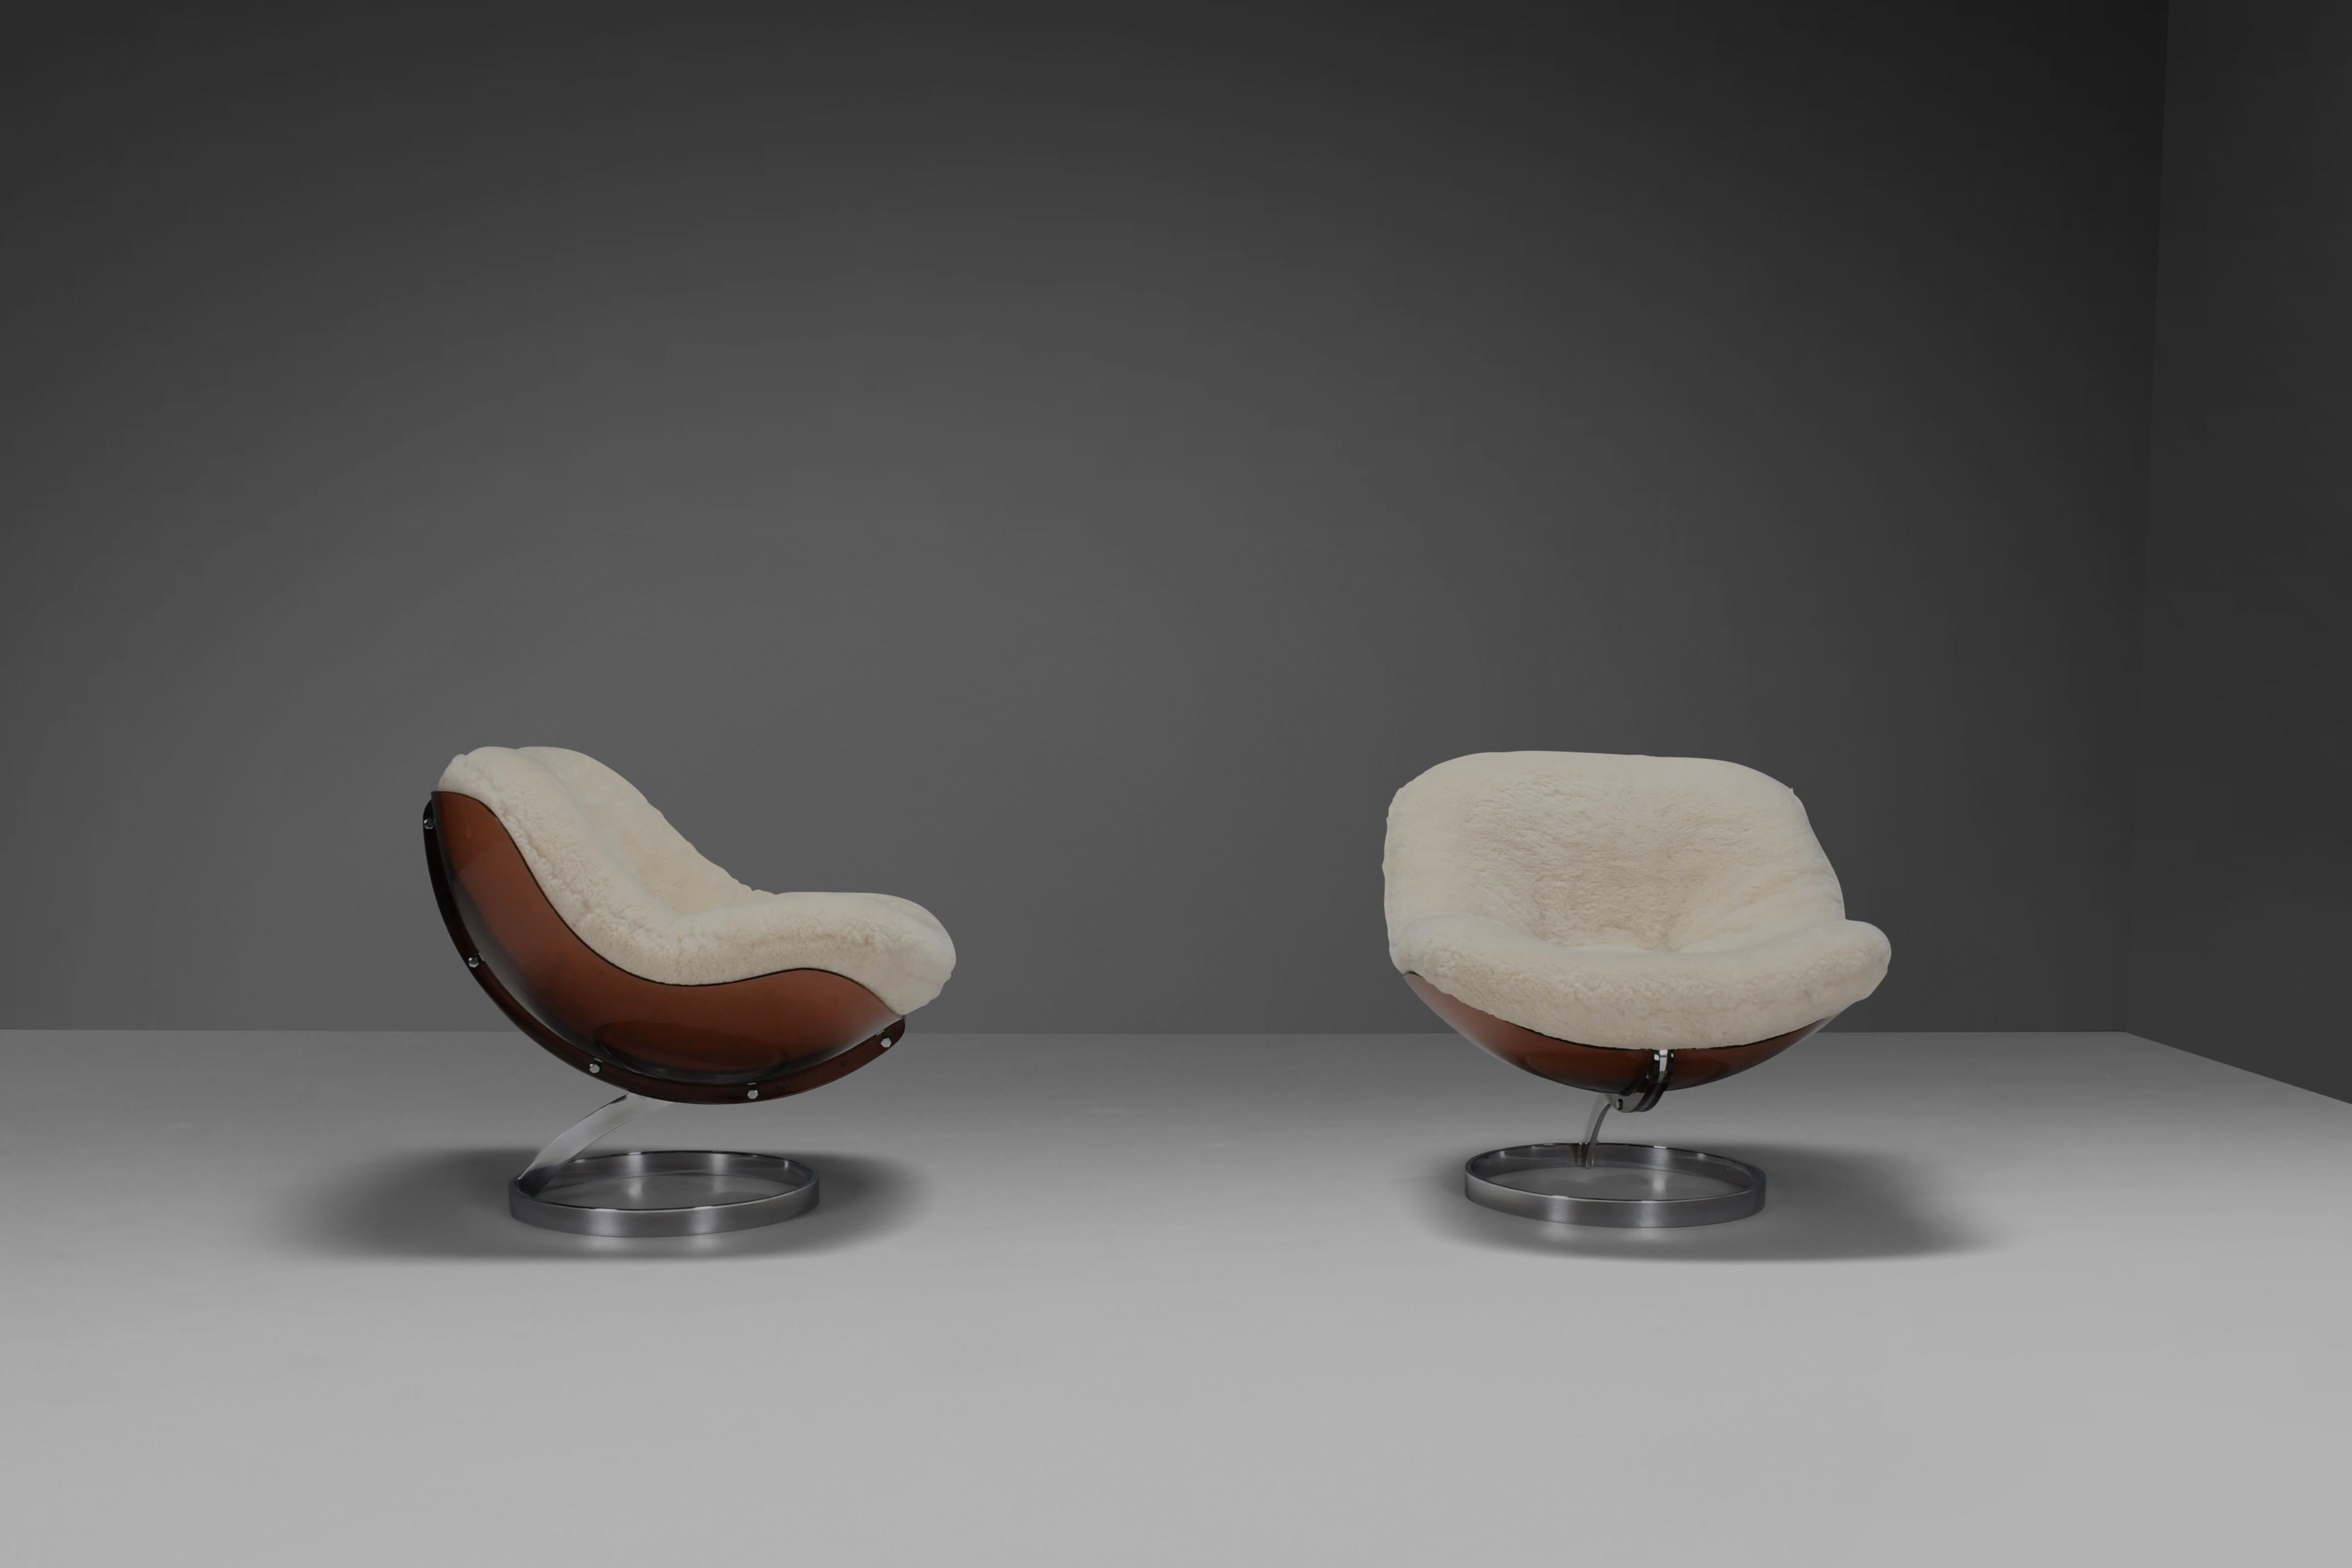 Set of Lucite and Wool ’Sphere’ Lounge Chairs by Boris Tabacoff for MMM, 1971 For Sale 2